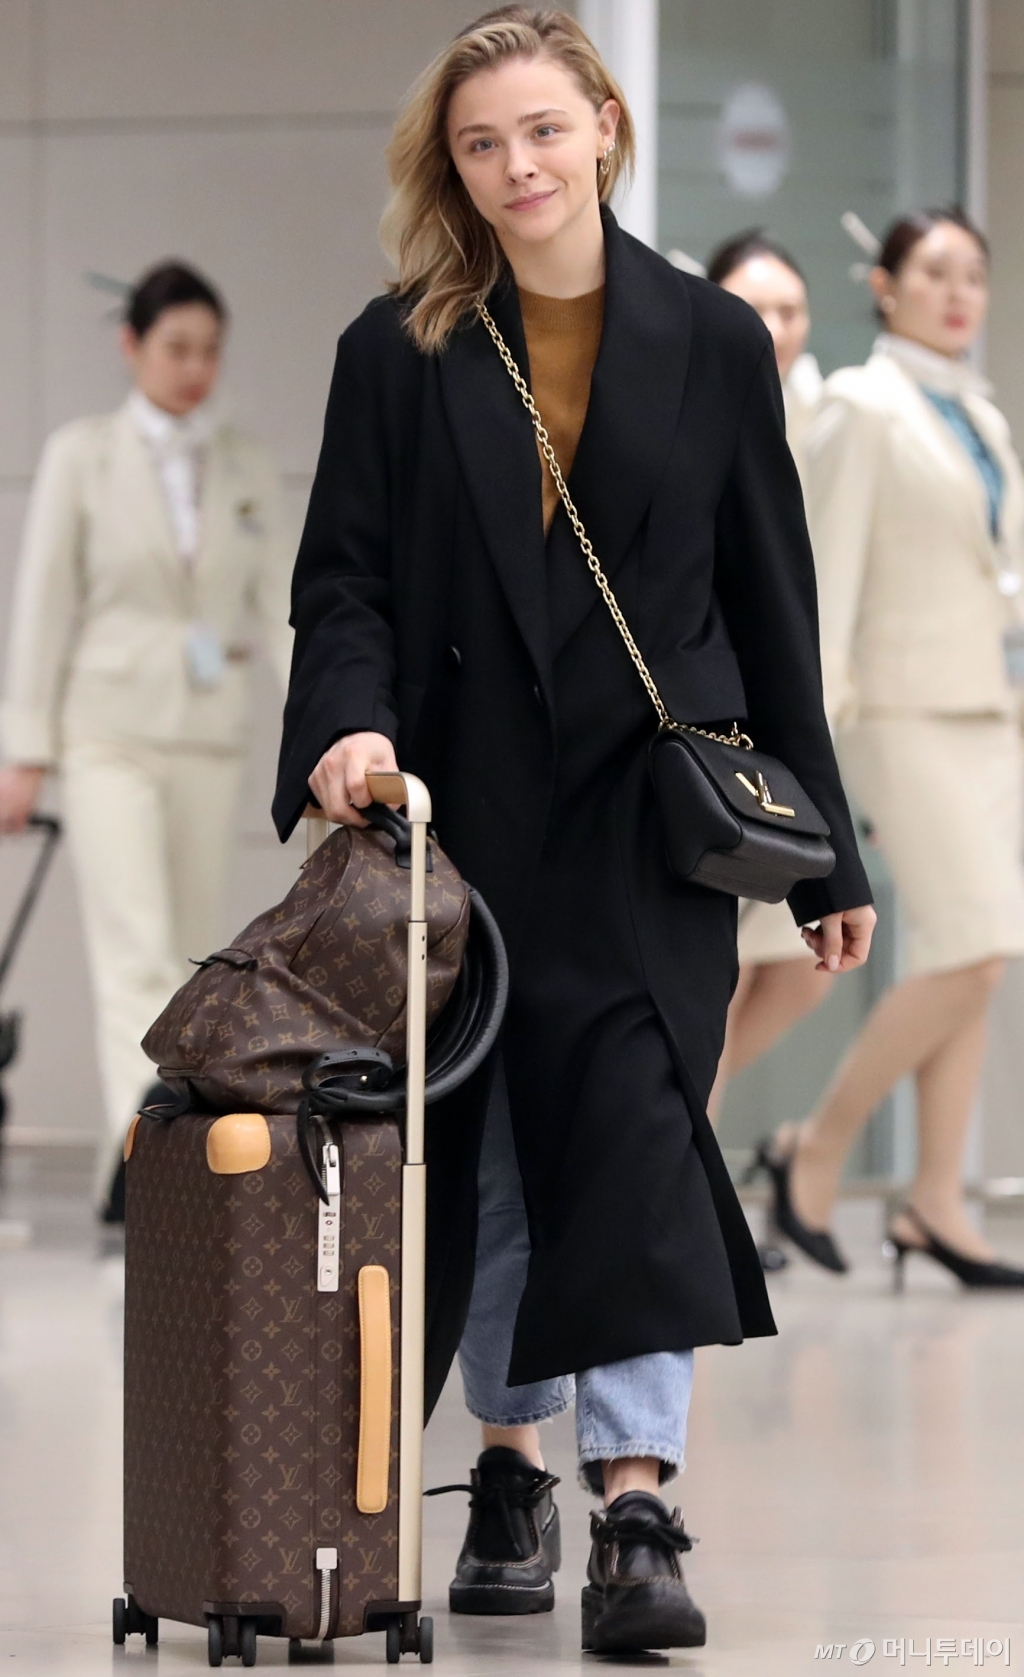 Hollywood Actor Chloe Moretz attended a fashion brand event and visited Incheon International Airport on the afternoon of the 28th.